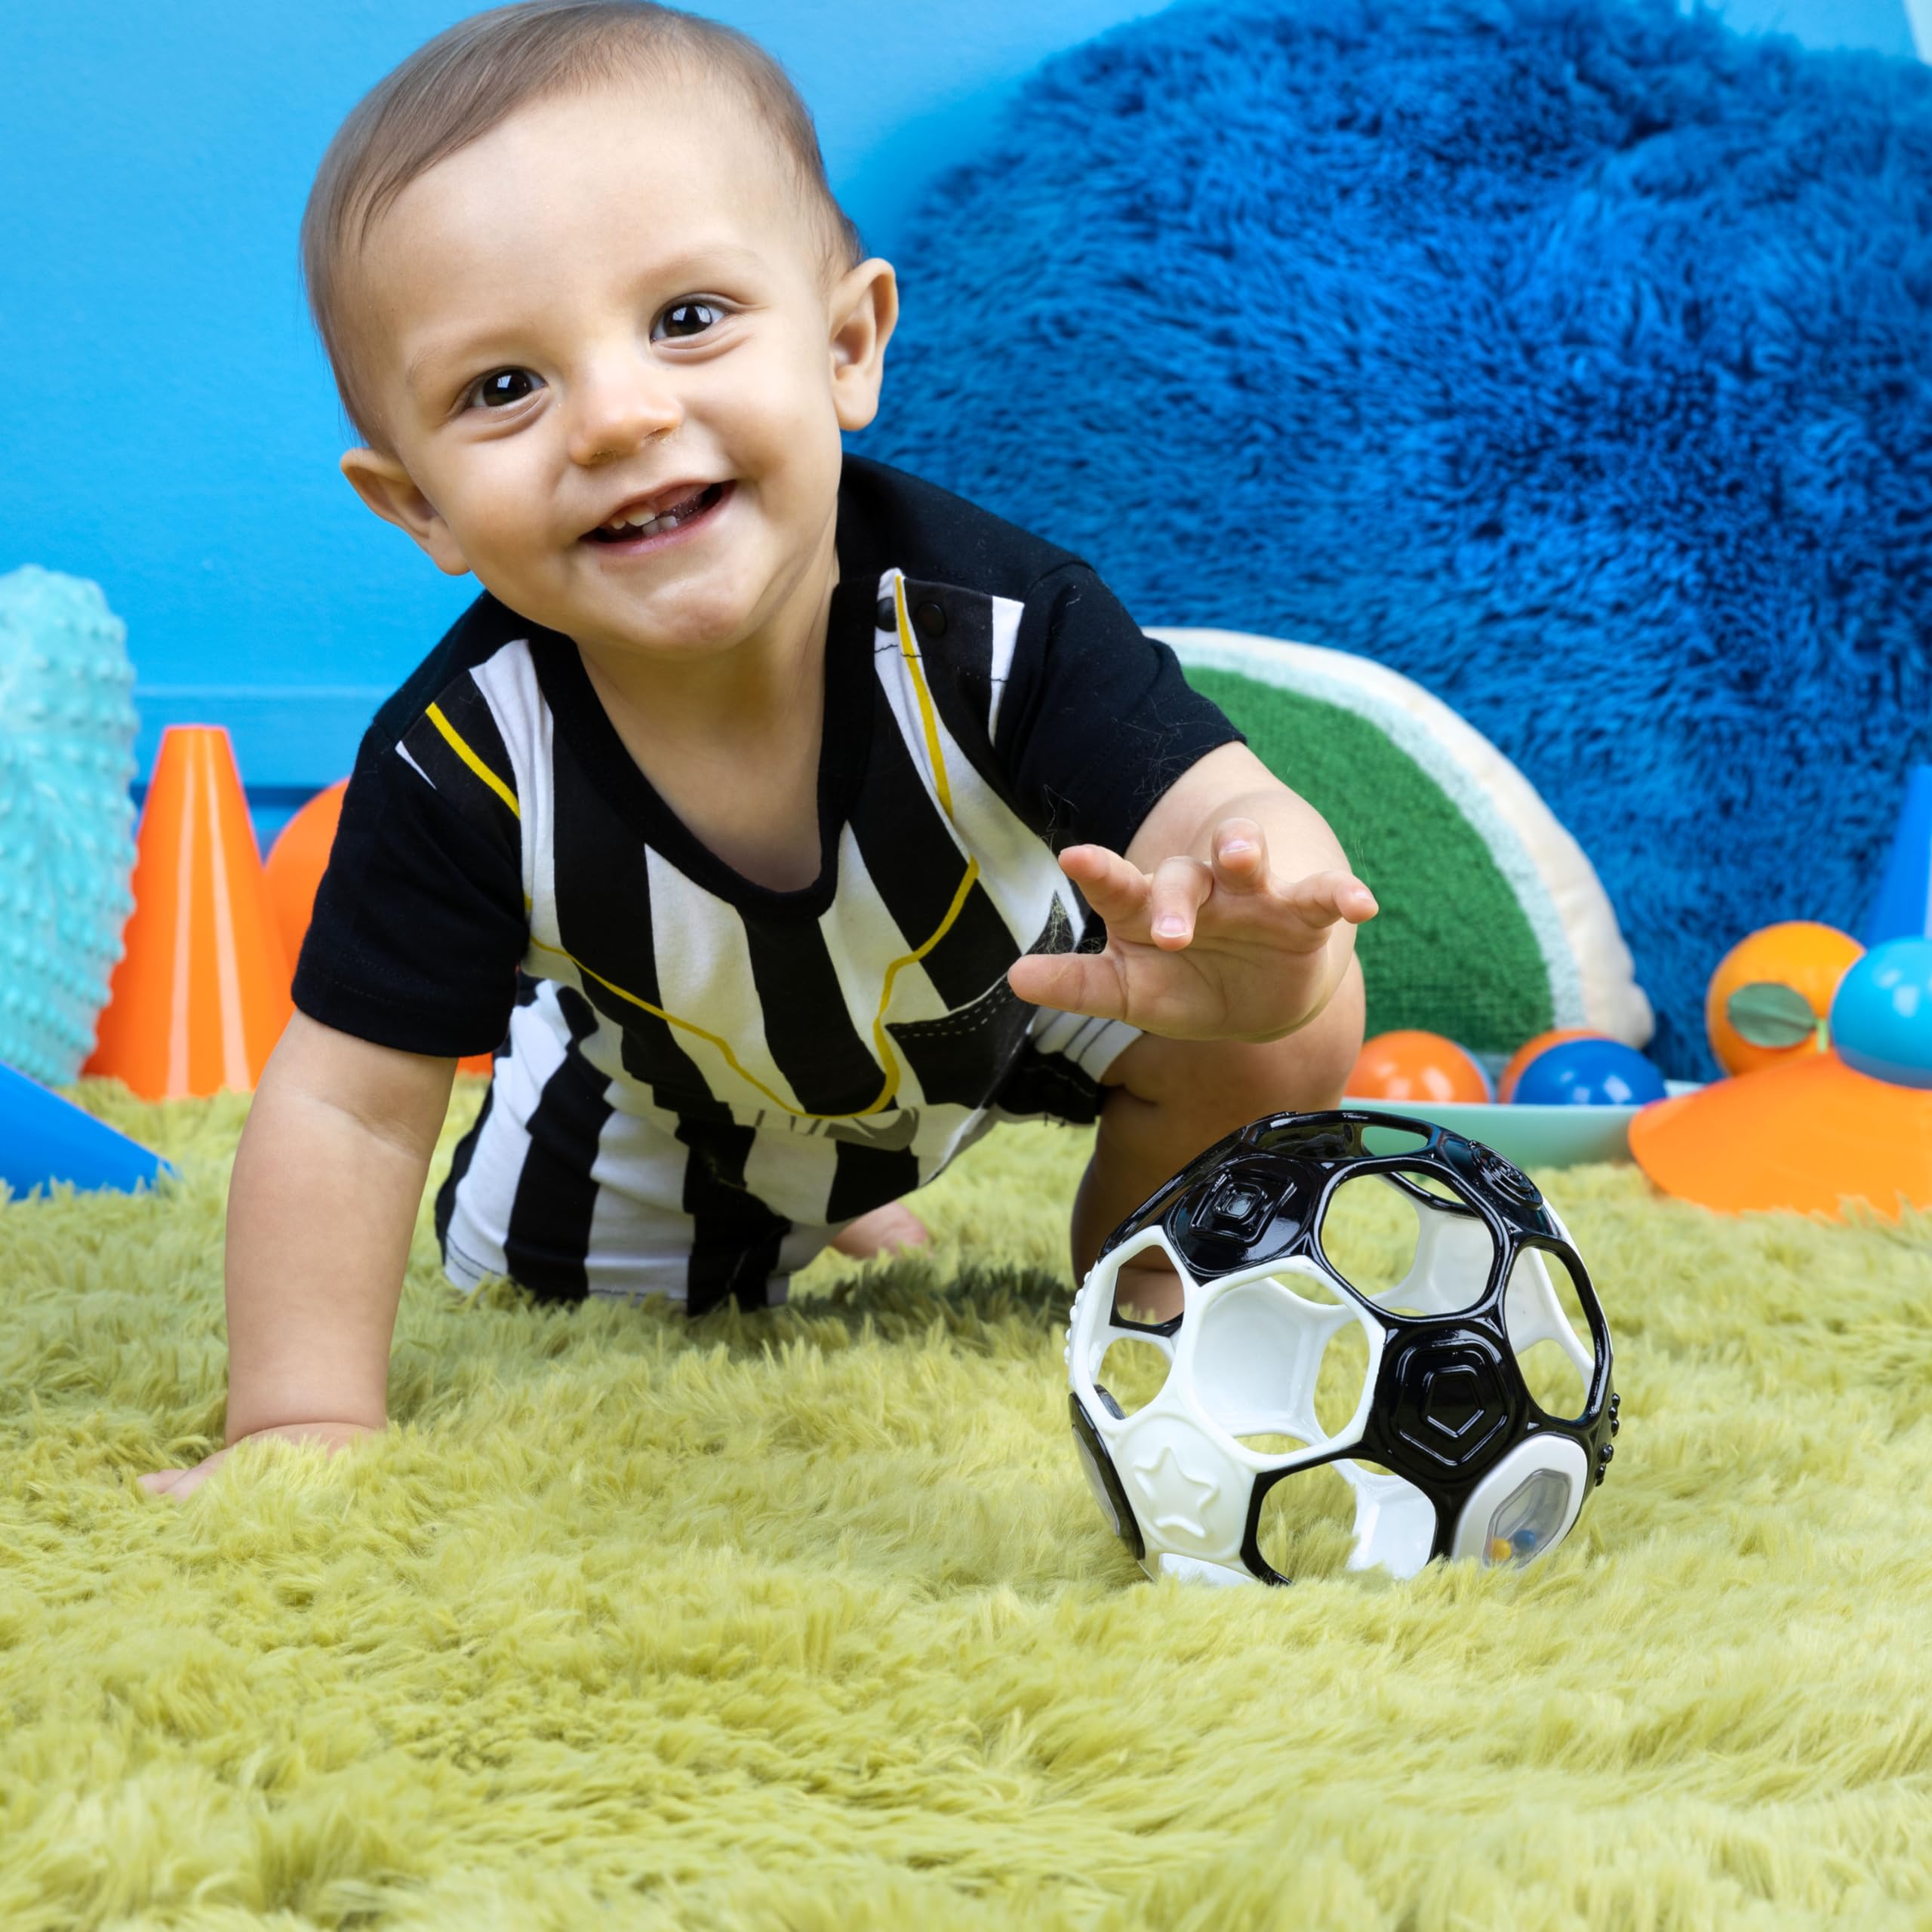 Bright Starts Oball Grippin' Goals Rattle Soccer Ball - Black & White, Easy-Grasp Toy for Newborn and Up